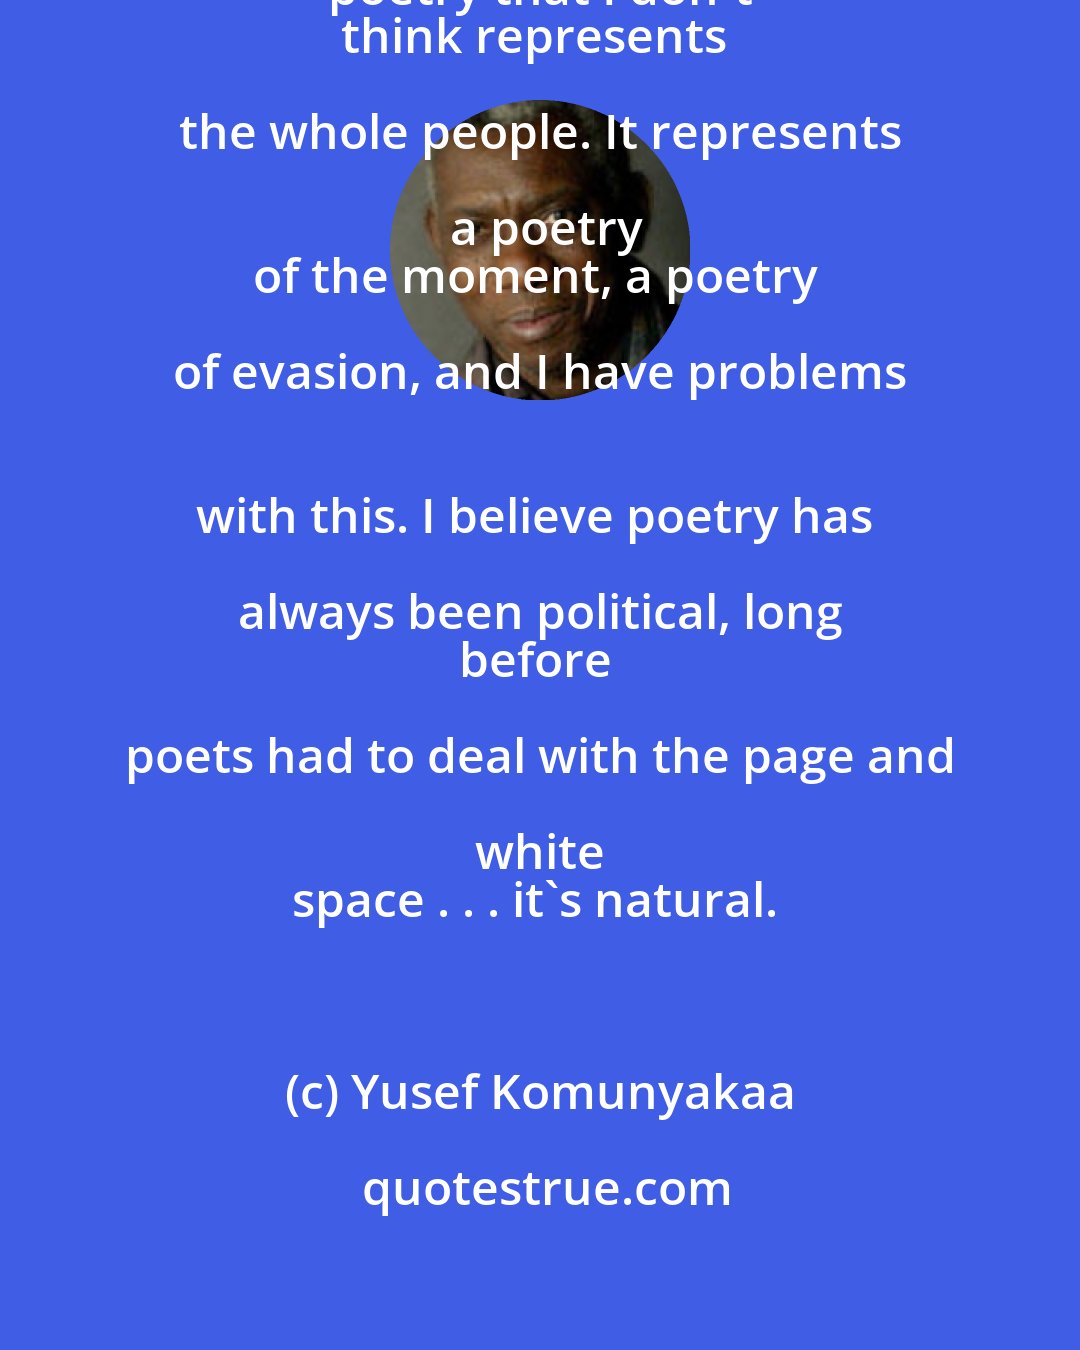 Yusef Komunyakaa: There's a sameness about American poetry that I don't 
think represents the whole people. It represents a poetry
of the moment, a poetry of evasion, and I have problems 
with this. I believe poetry has always been political, long 
before poets had to deal with the page and white 
space . . . it's natural.